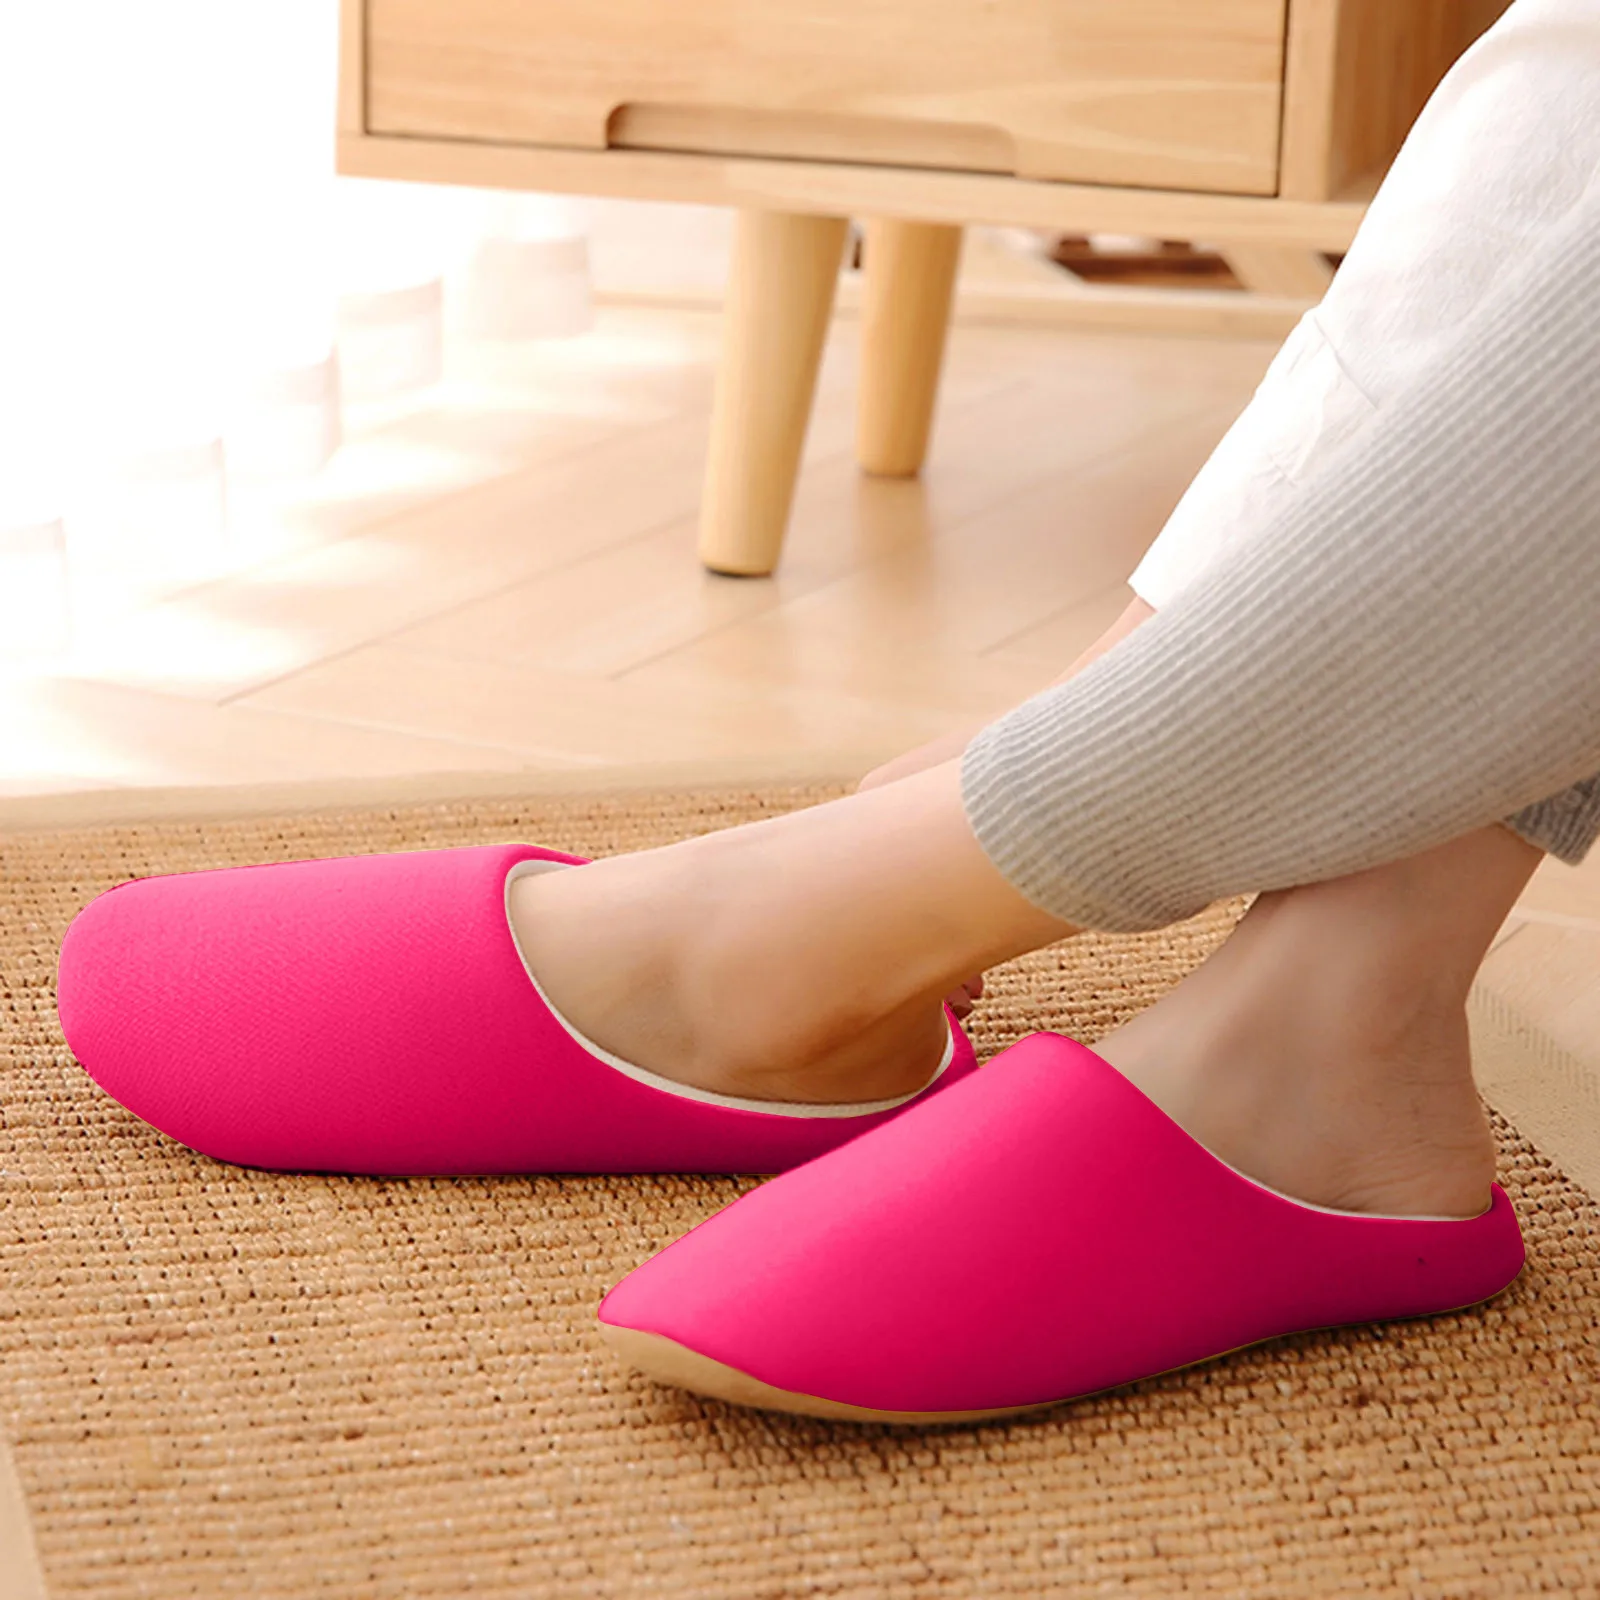 

Shoes For Women Winter Slippers Hyoma Platform Cotton Antiskid Warm Home Rainshoes Shoes For Women Zapatos Mujer Chaussure Femme